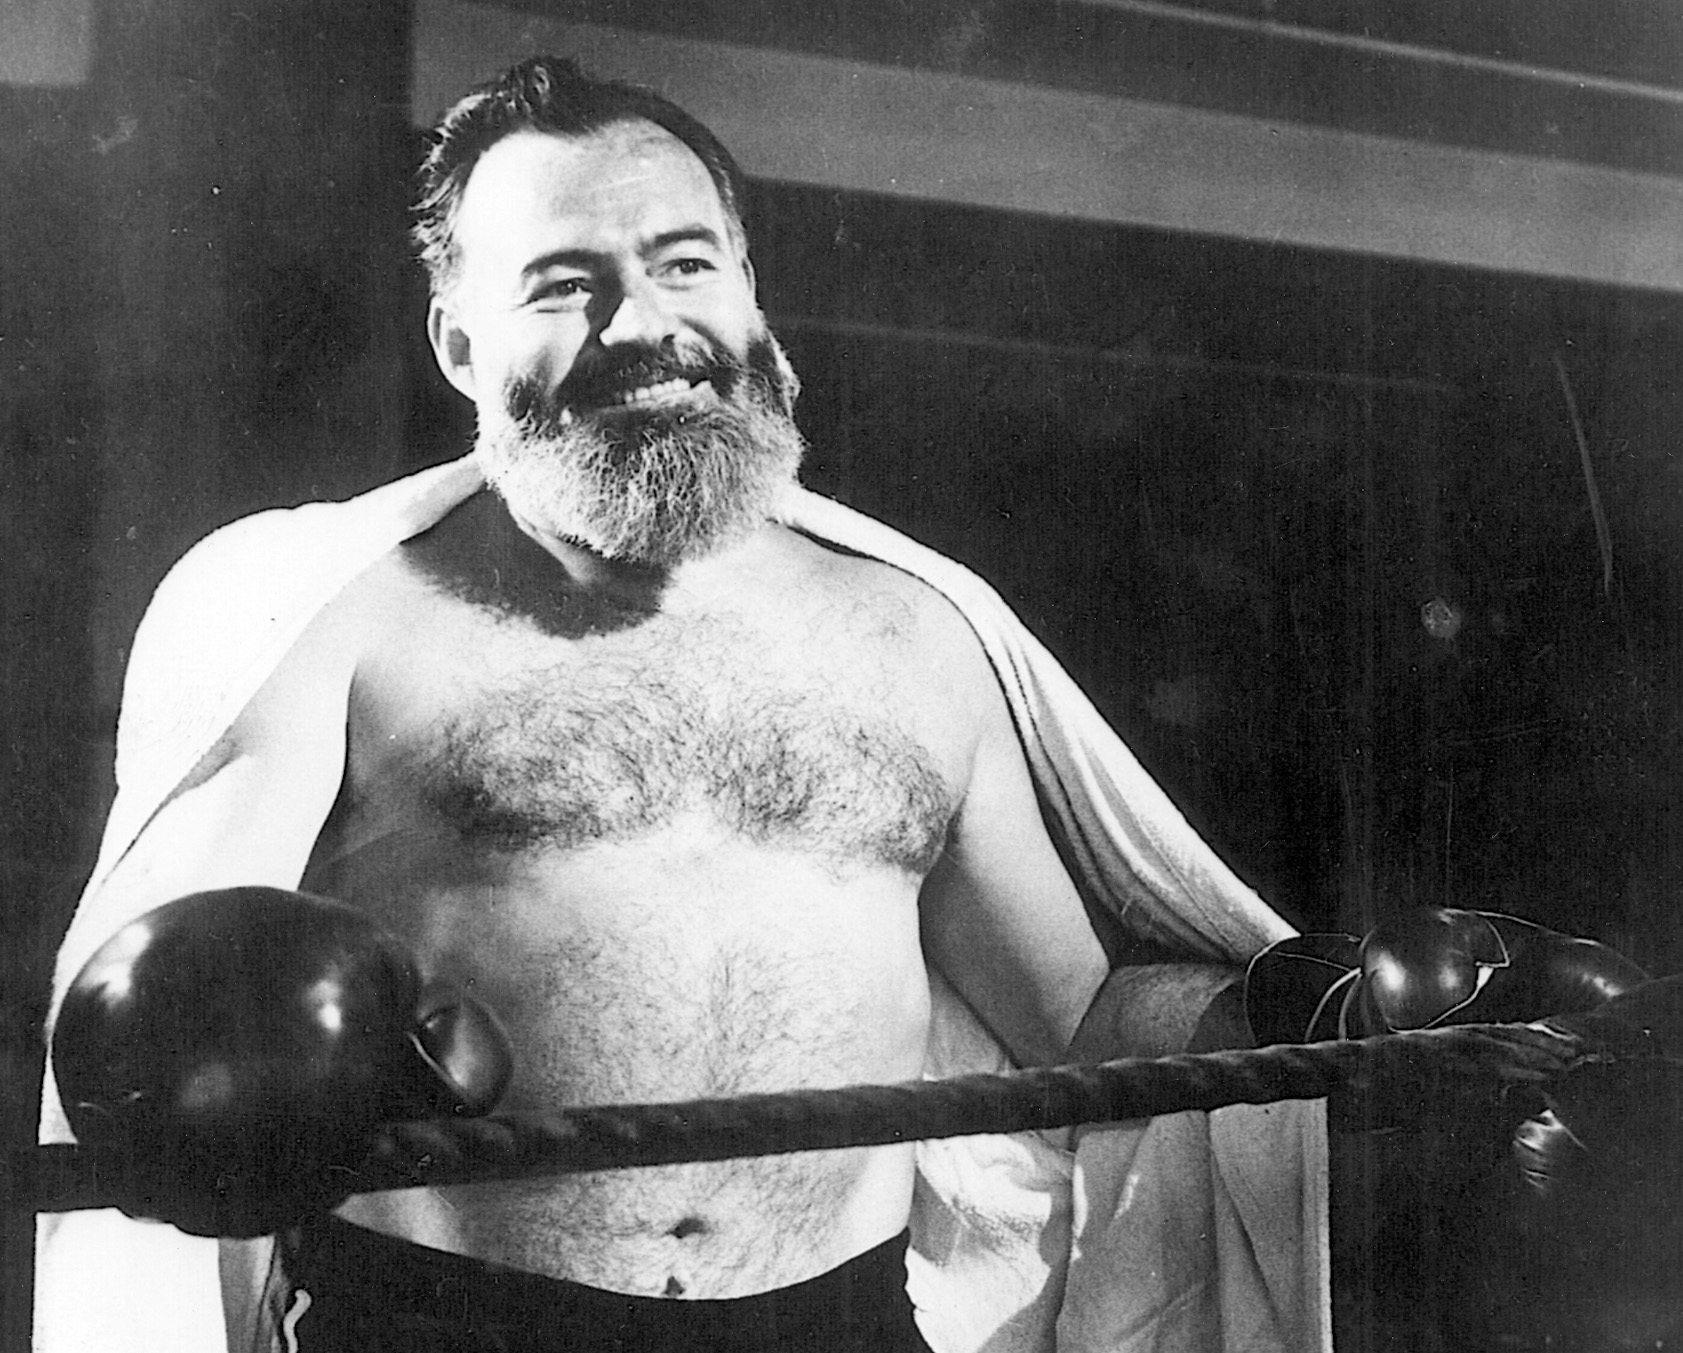 Hemingway gets ready to spar in the boxing ring prior to his departure for European adventures as a war correspondent.